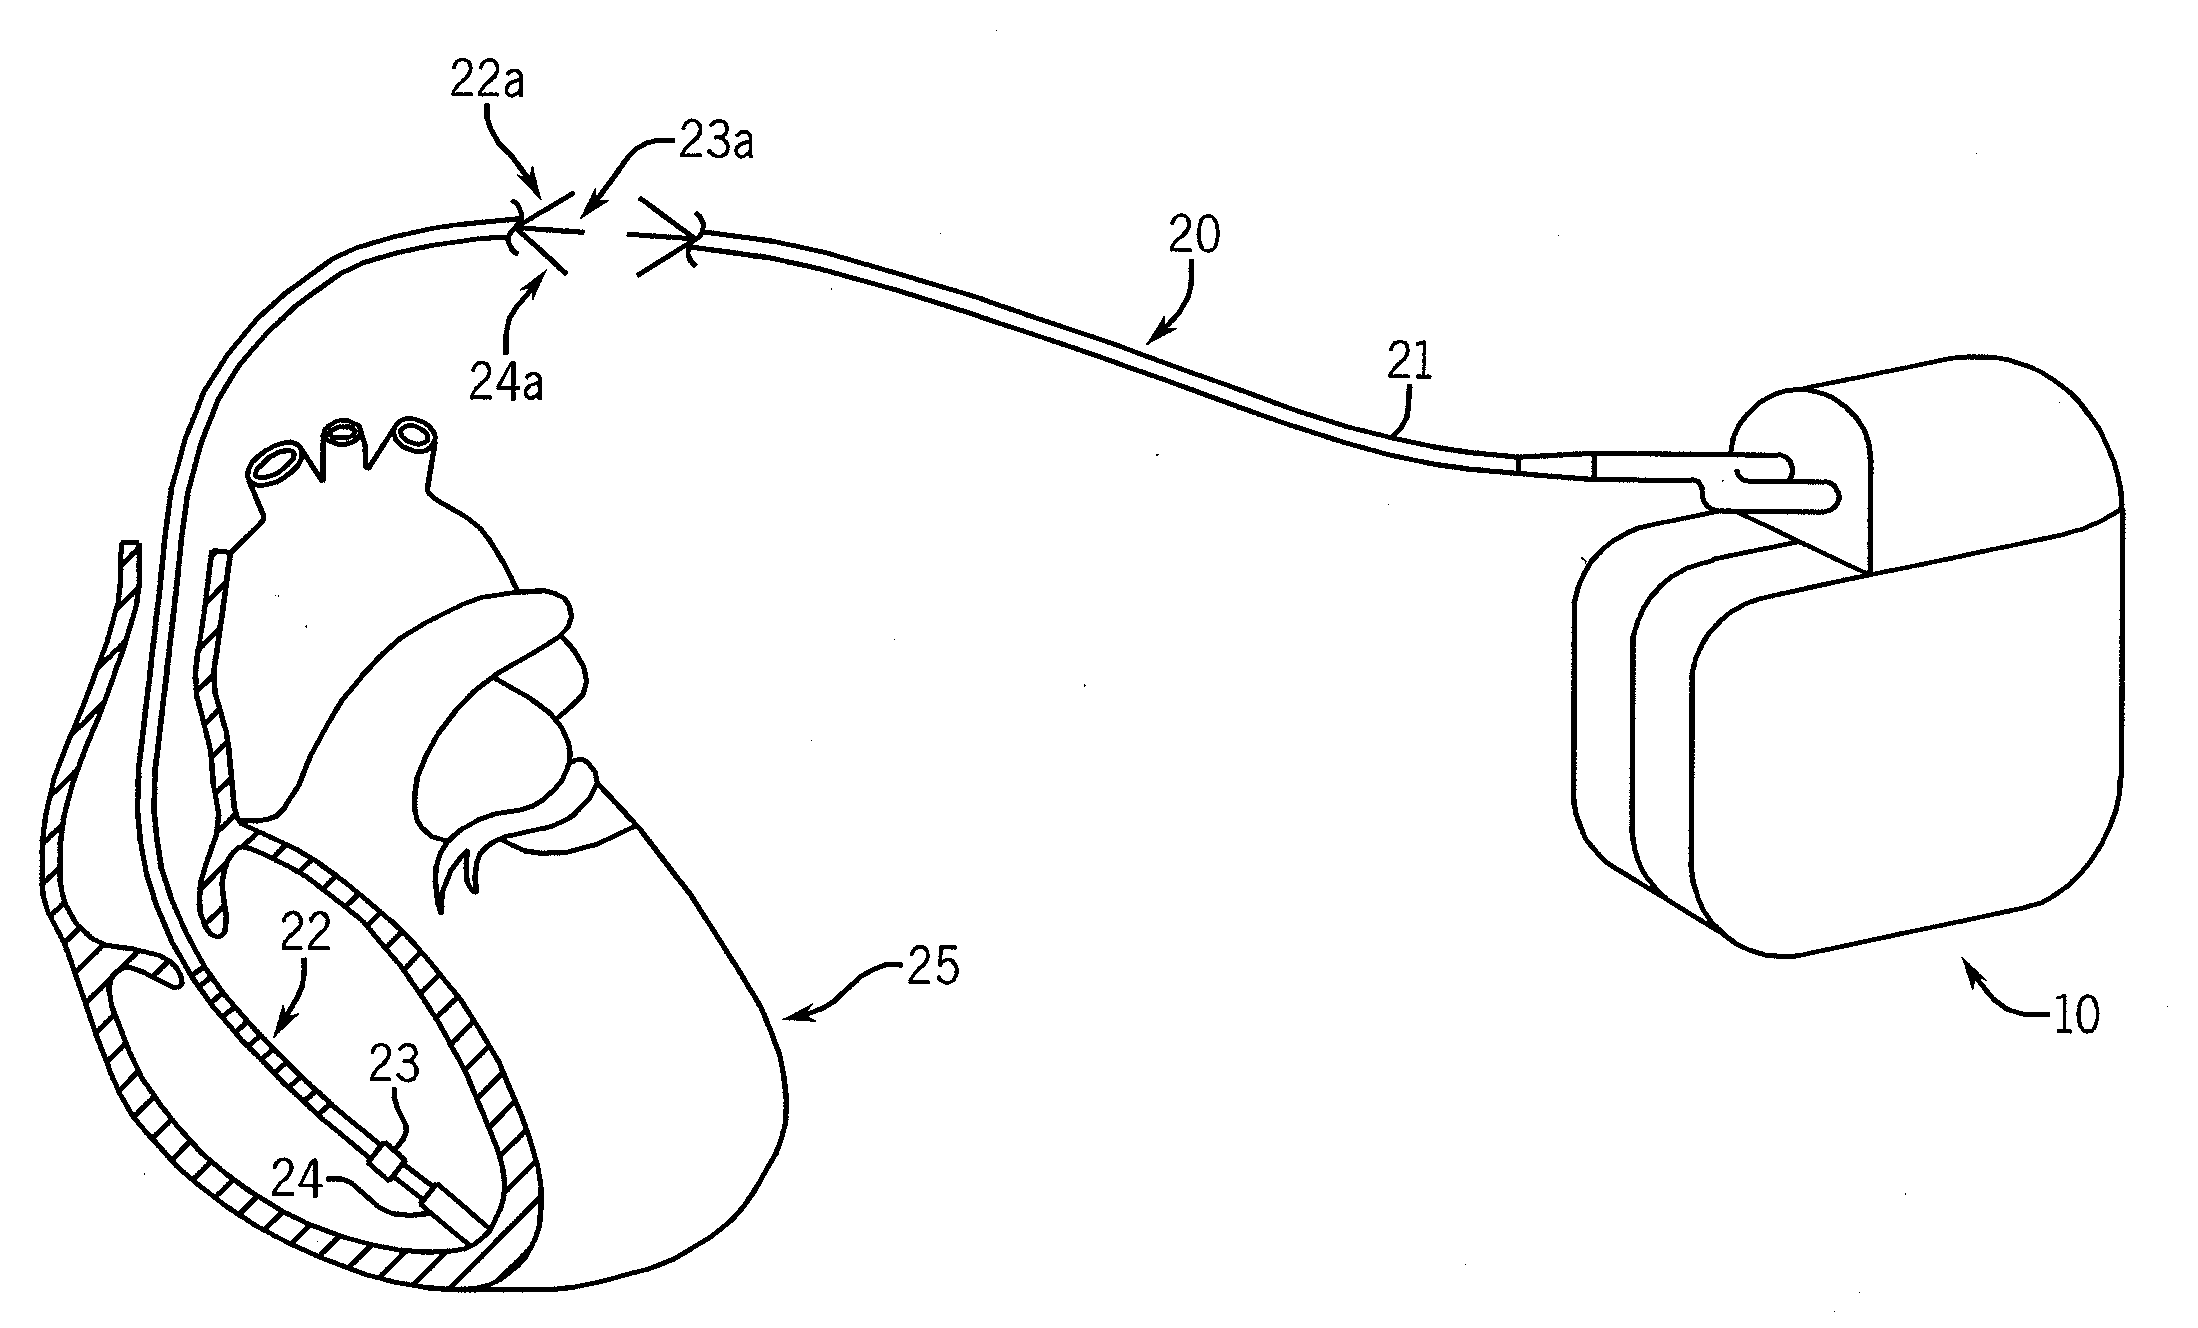 Method and apparatus for detection of lead conductor anomalies using dynamic electrical parameters